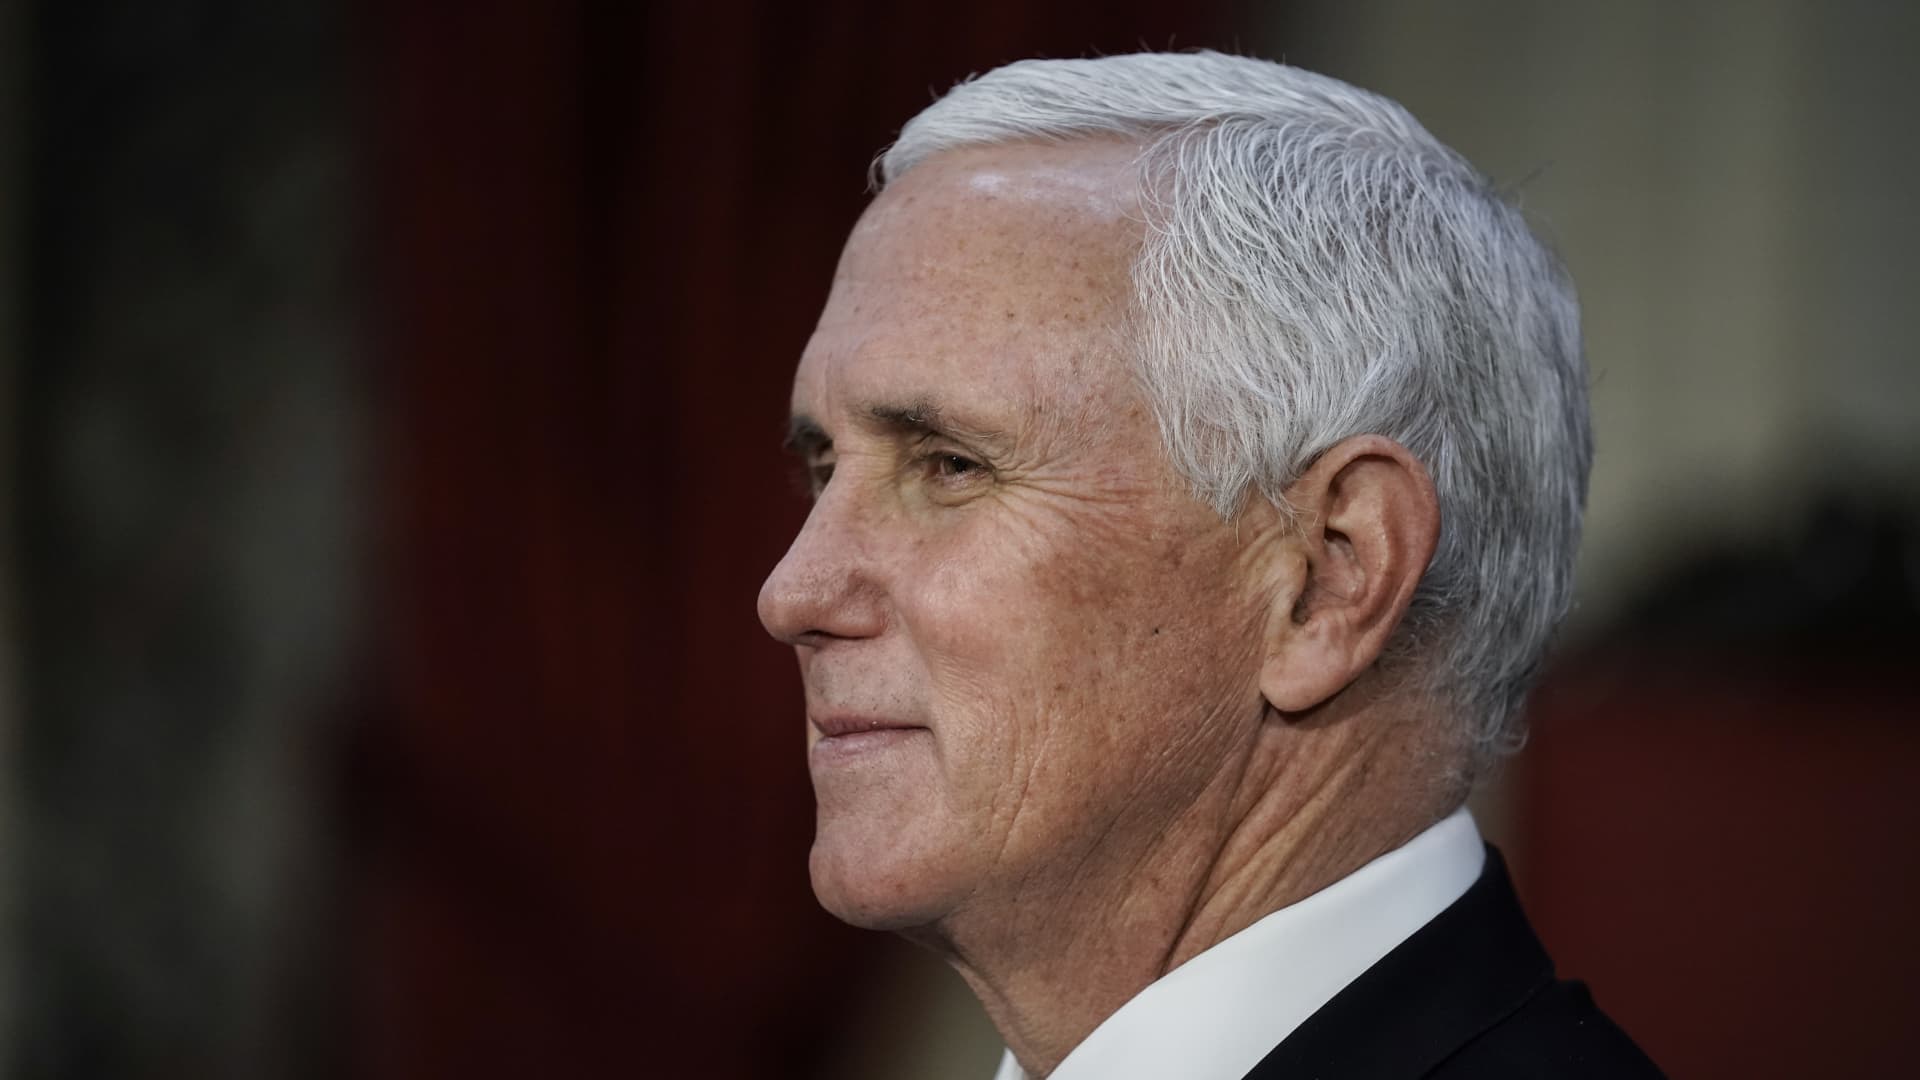 Vice President Mike Pence finishes a swearing-in ceremony for senators in the Old Senate Chamber on Capitol Hill on January 3, 2021 in Washington, DC. Both chambers are holding rare Sunday sessions to open the new Congress on January 3 as the Constitution requires.